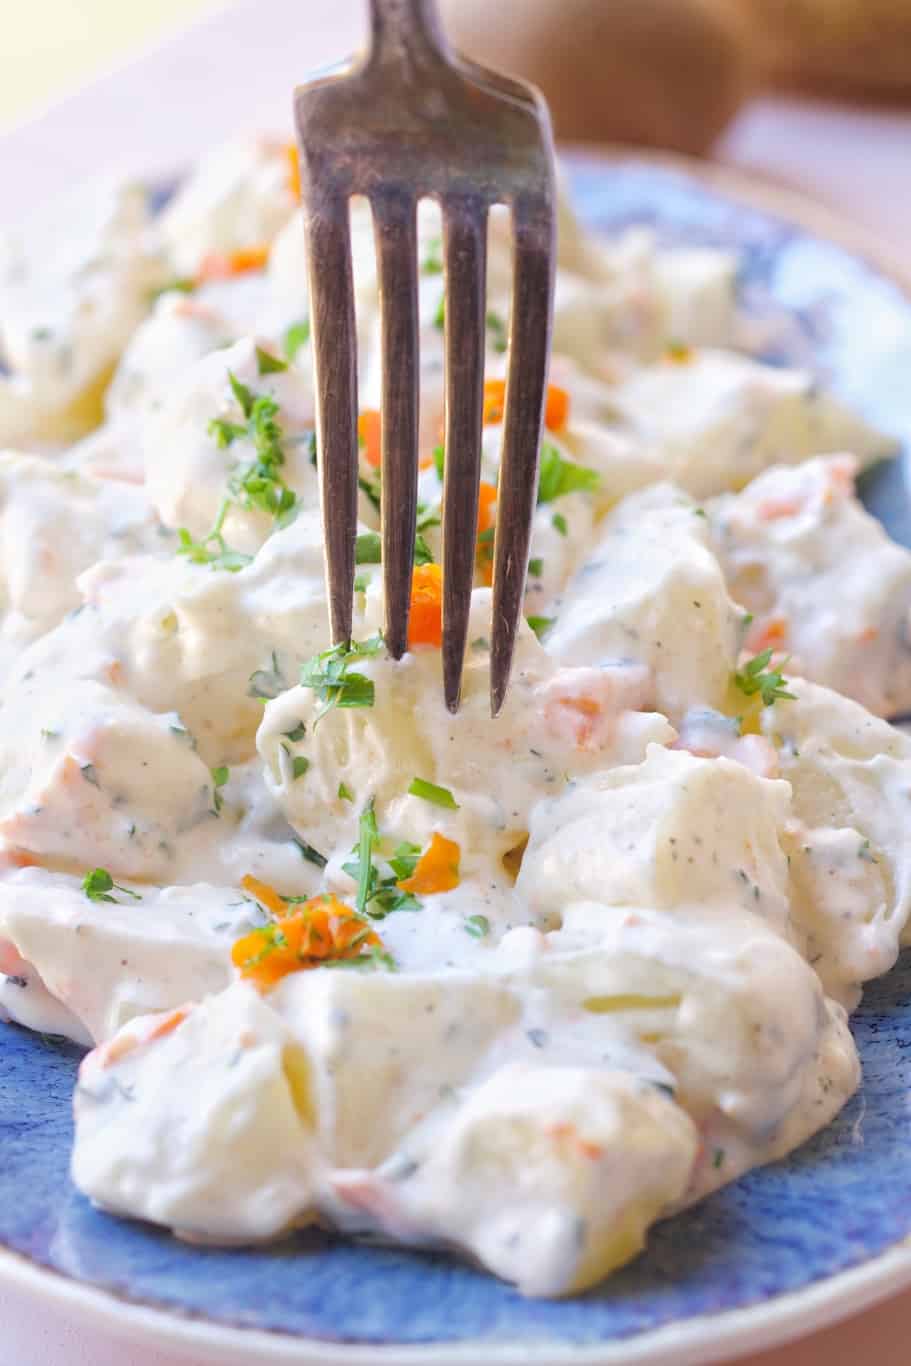 juan pollo potato salad rich with creamy mayo dressing served with finely chopped fresh parsley and finely chopped carrots